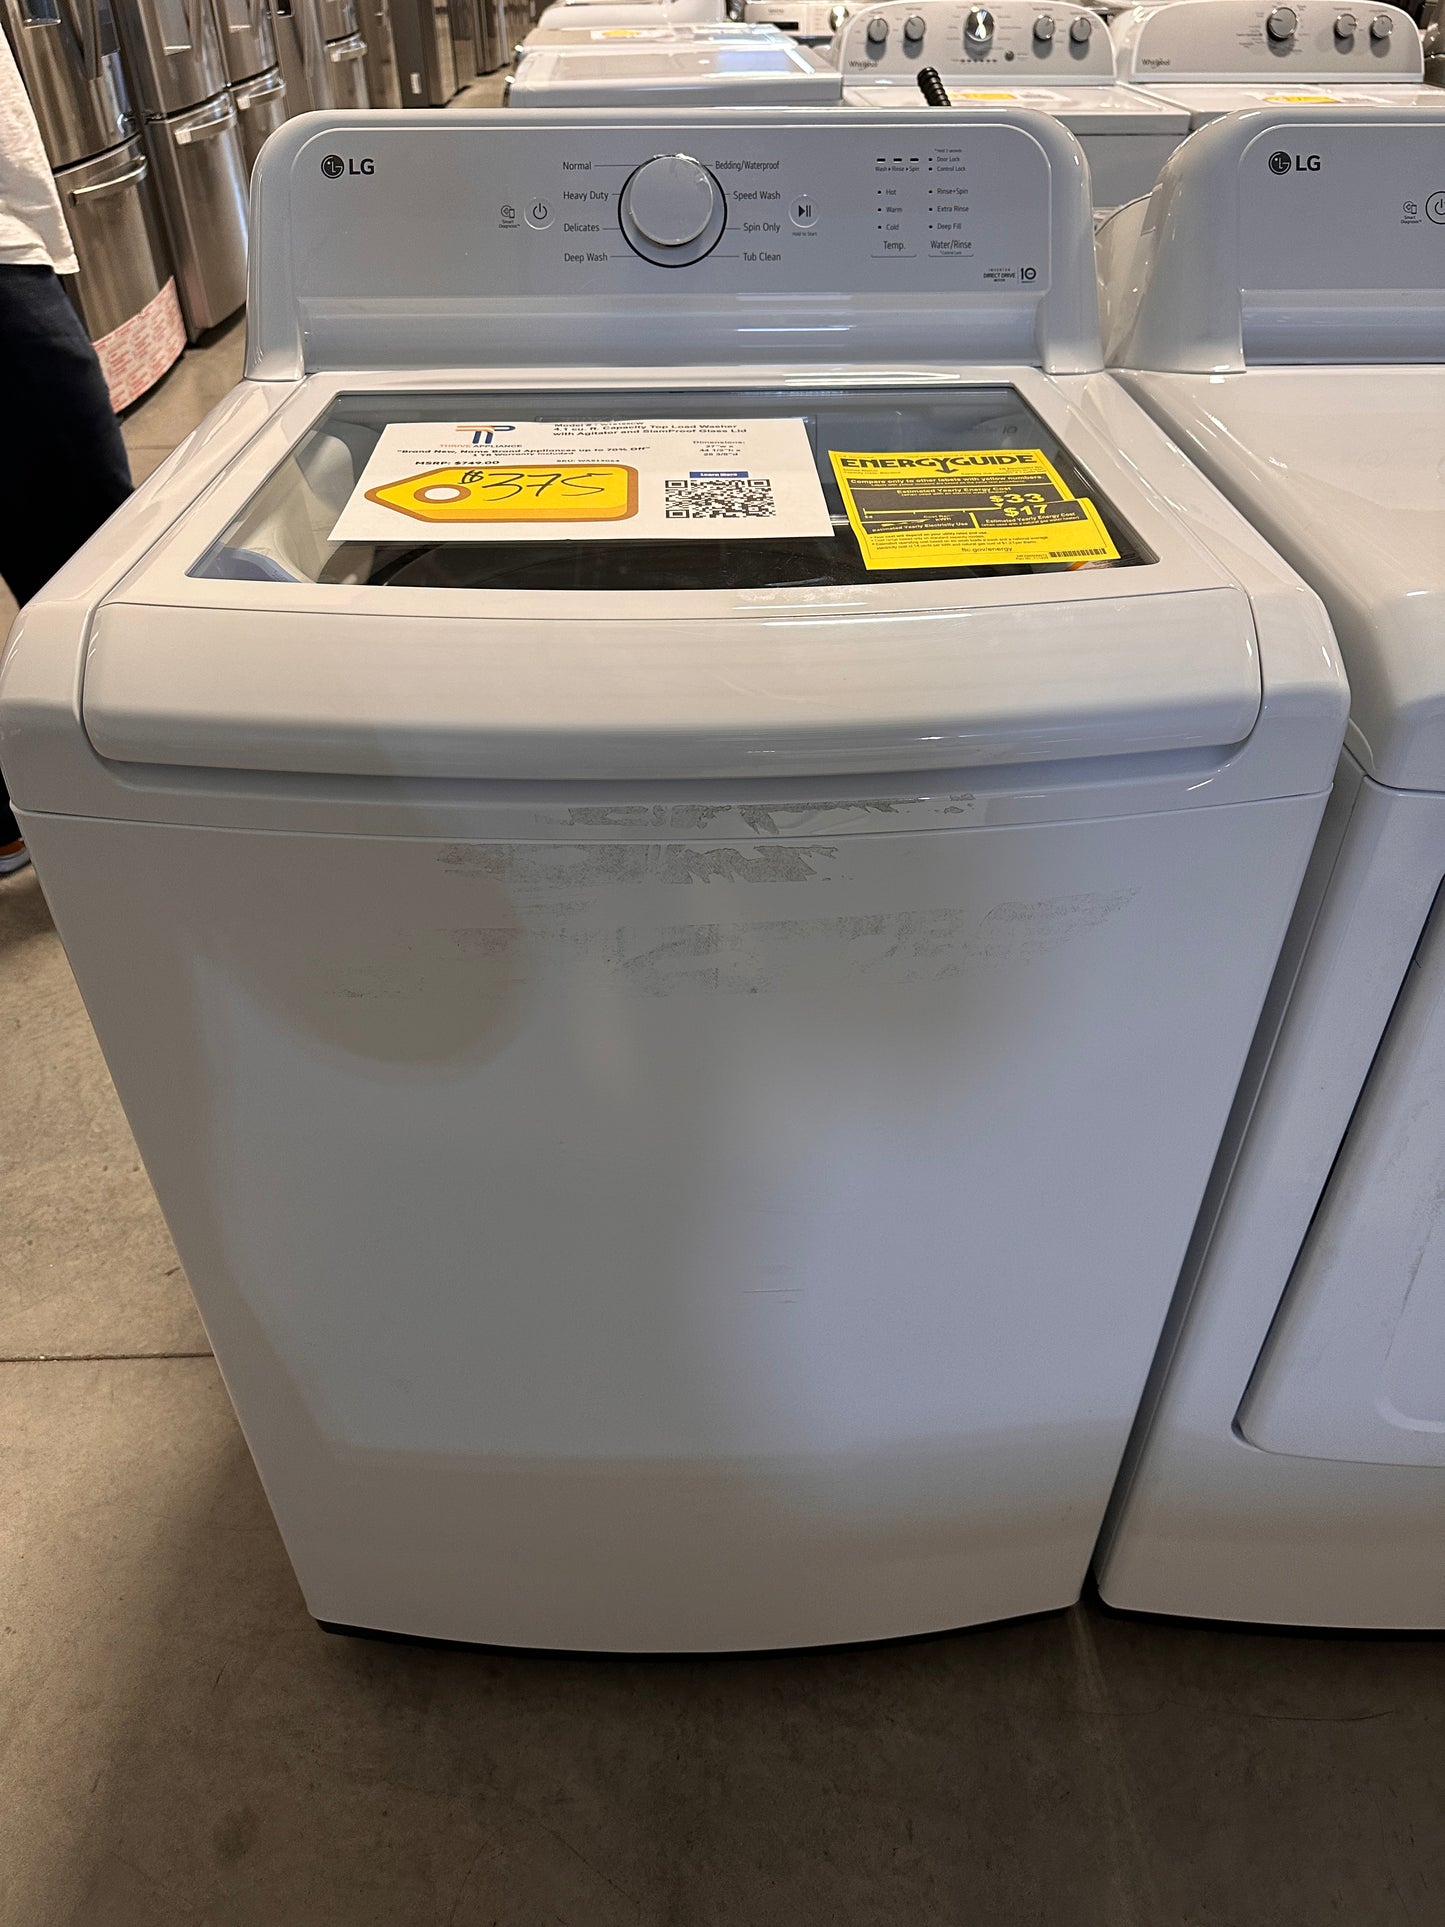 Top Load Washer with SlamProof Glass Lid - White  Model:WT6105CW  WAS13064